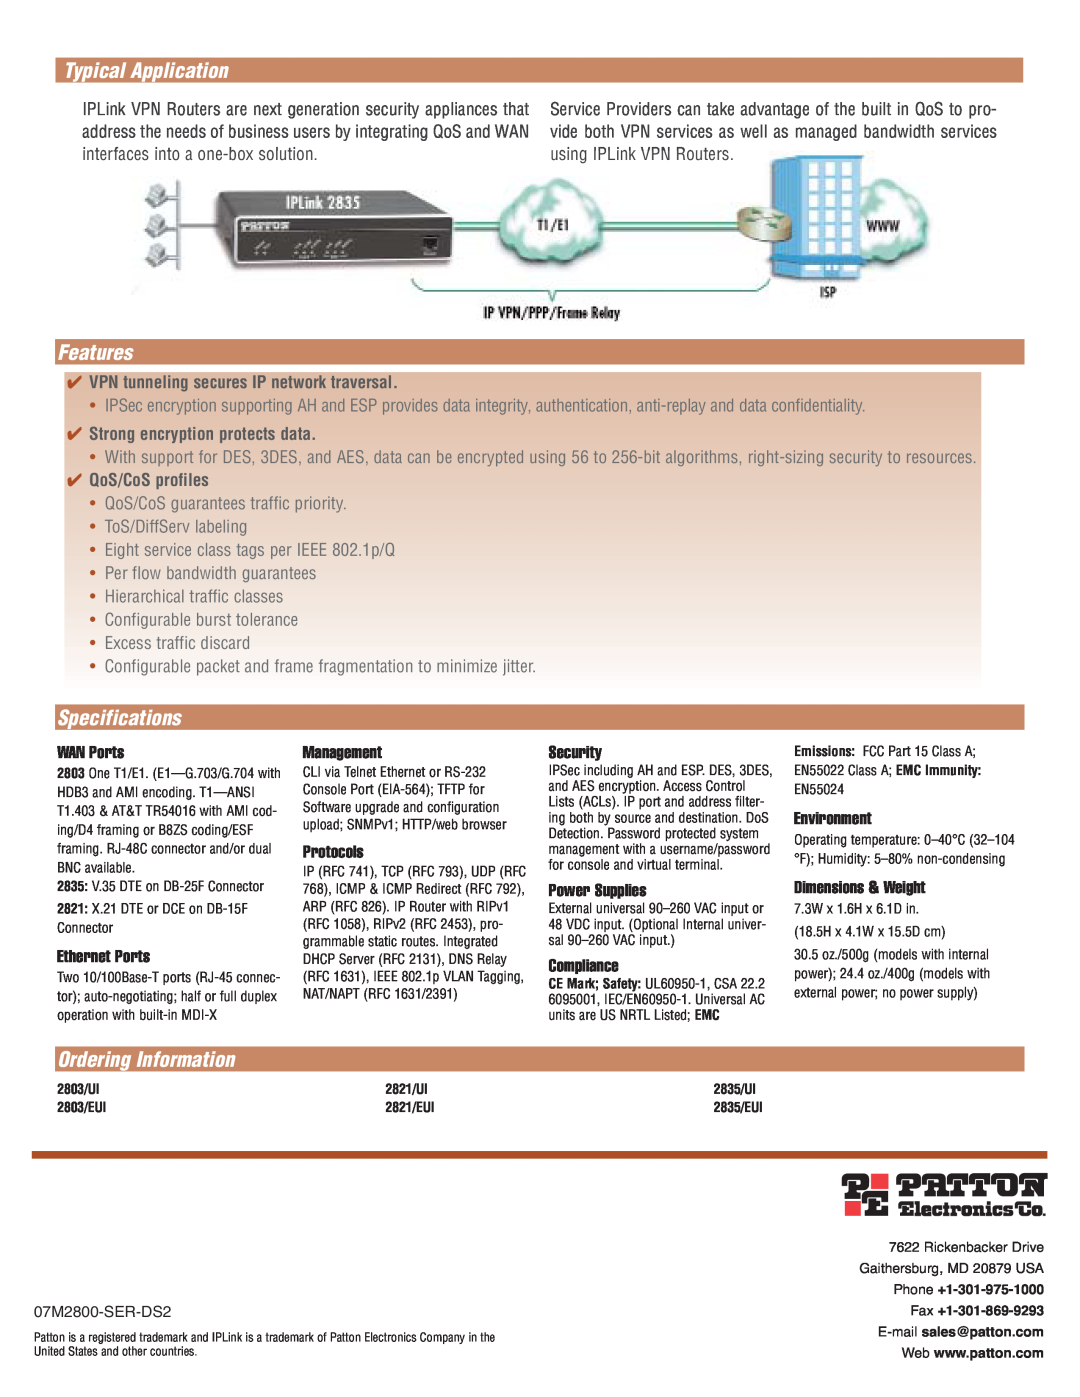 Patton electronic 2821 07M2800-SER-DS2, Typical Application, Features, Specifications, Ordering Information, WAN Ports 